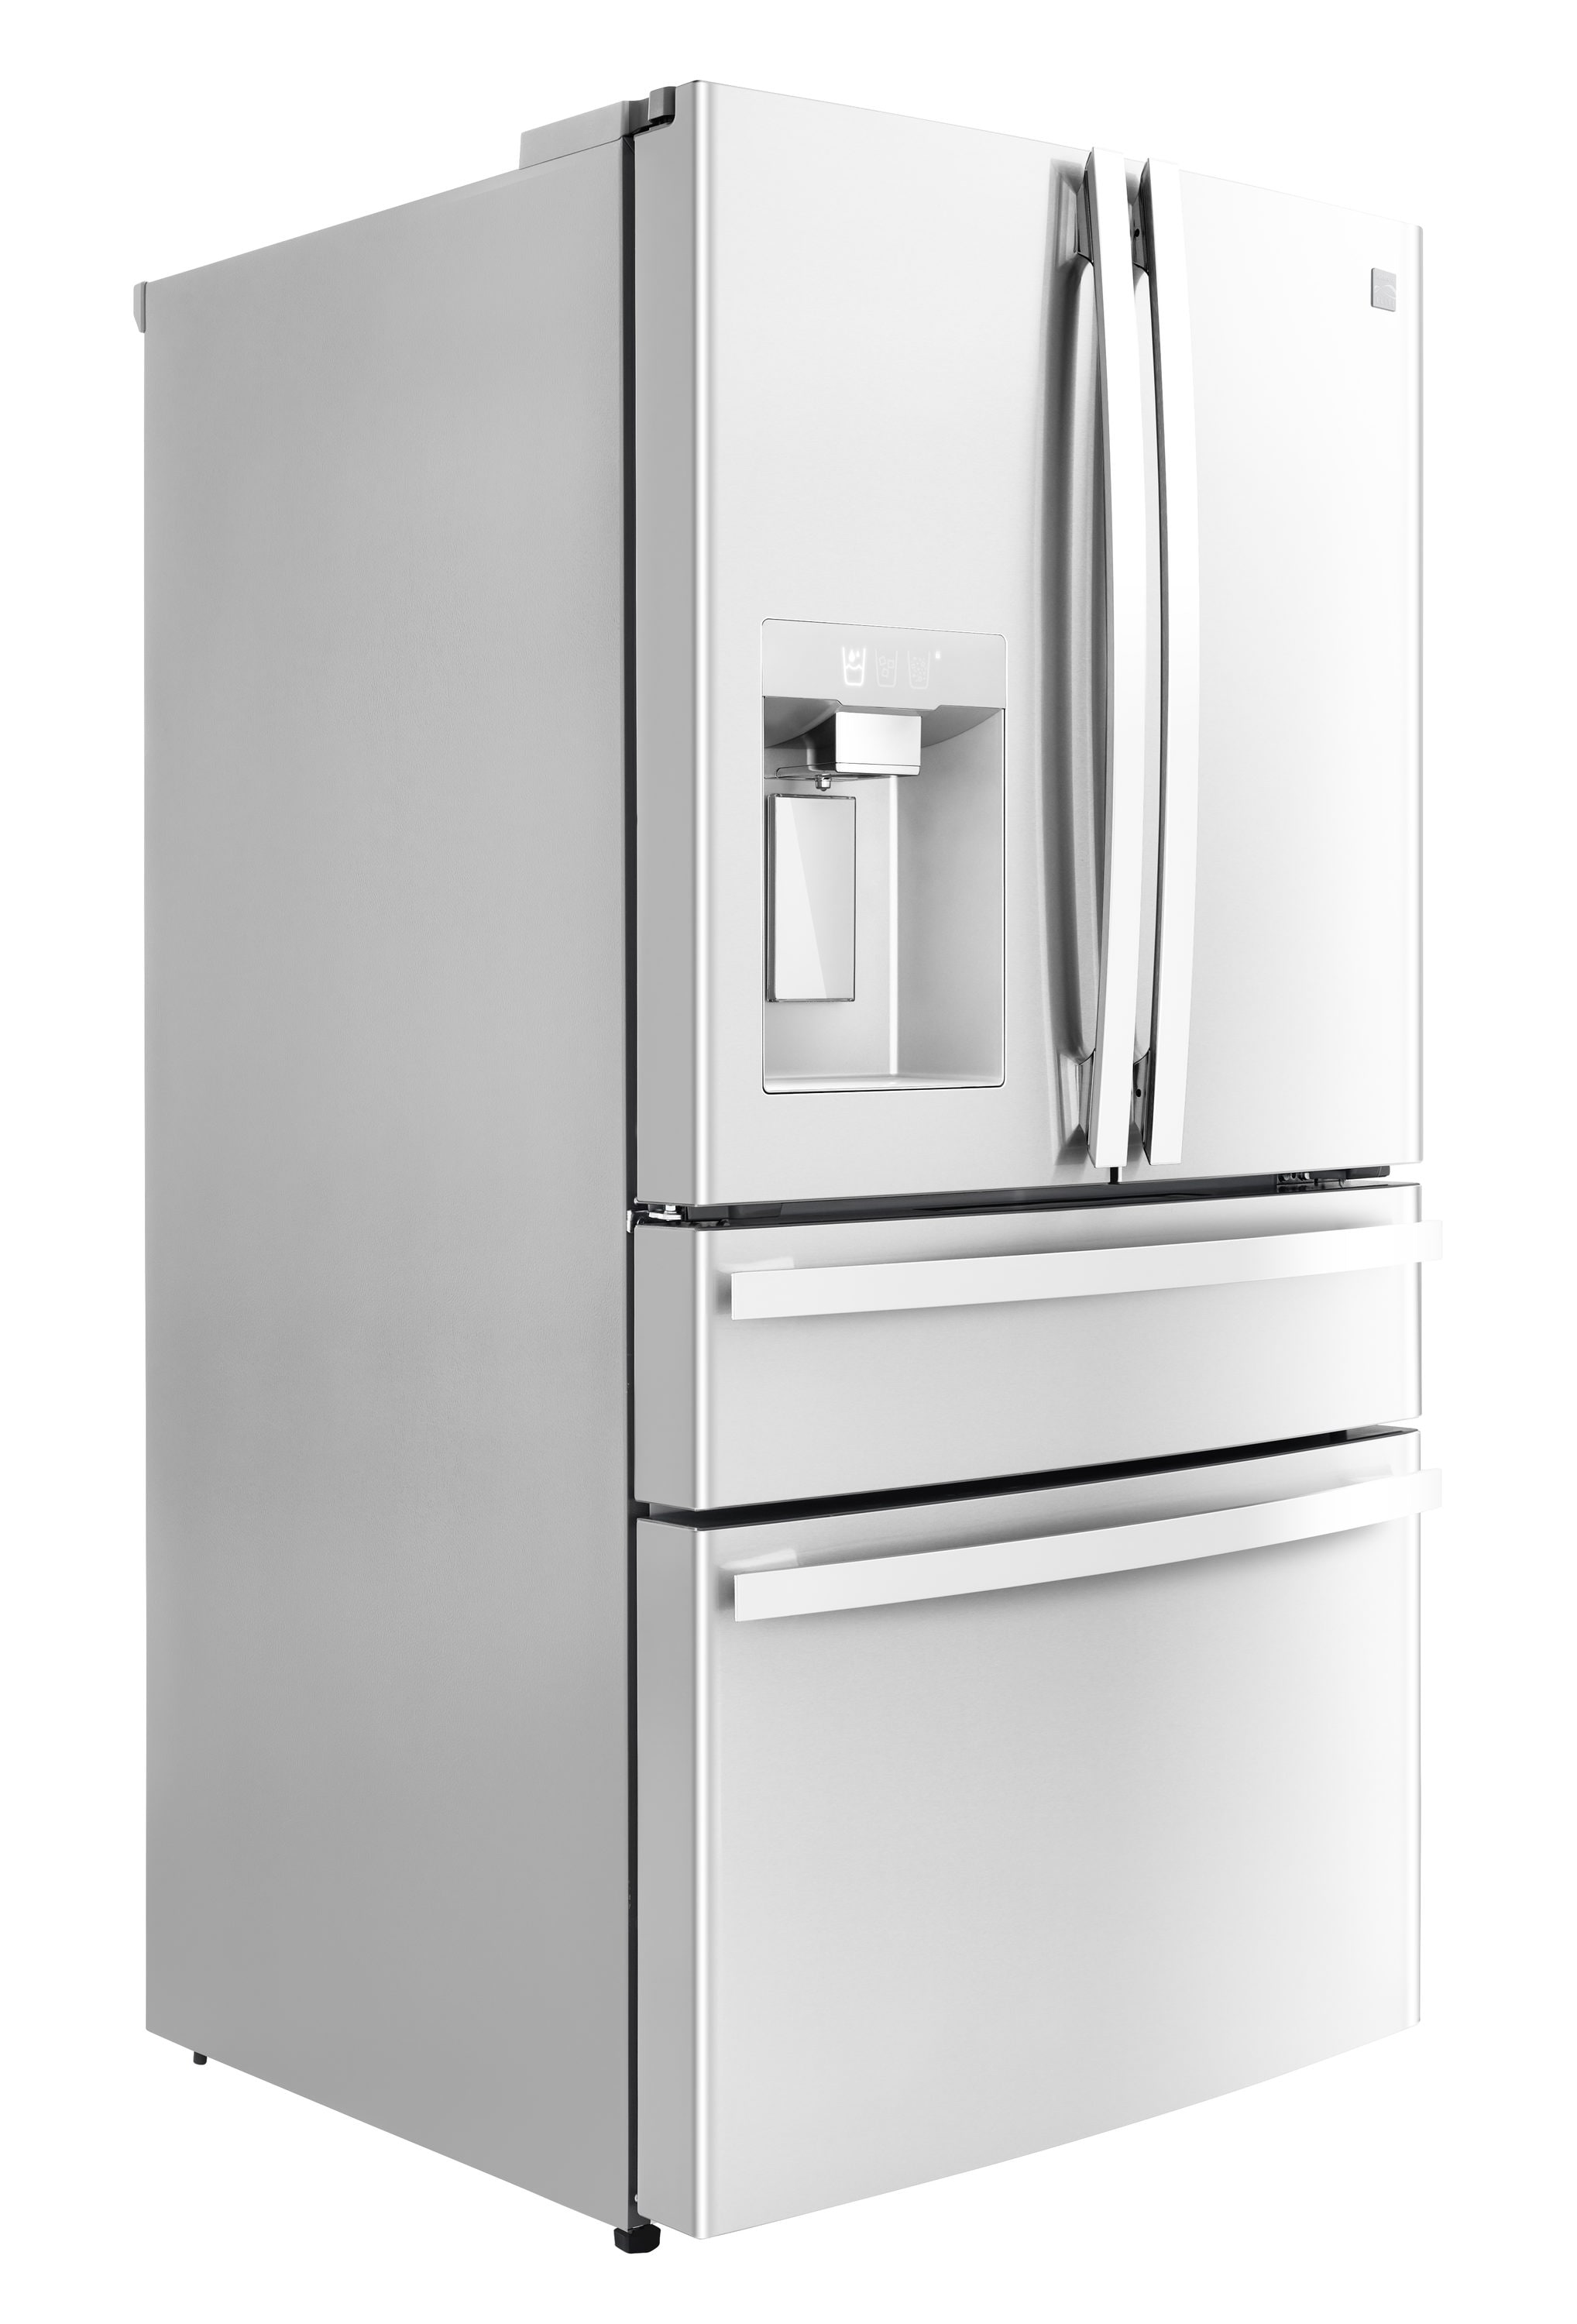 Kenmore Elite 36 French Door Refrigerator,Full Size,White 888632 – APPLIANCE  BAY AREA